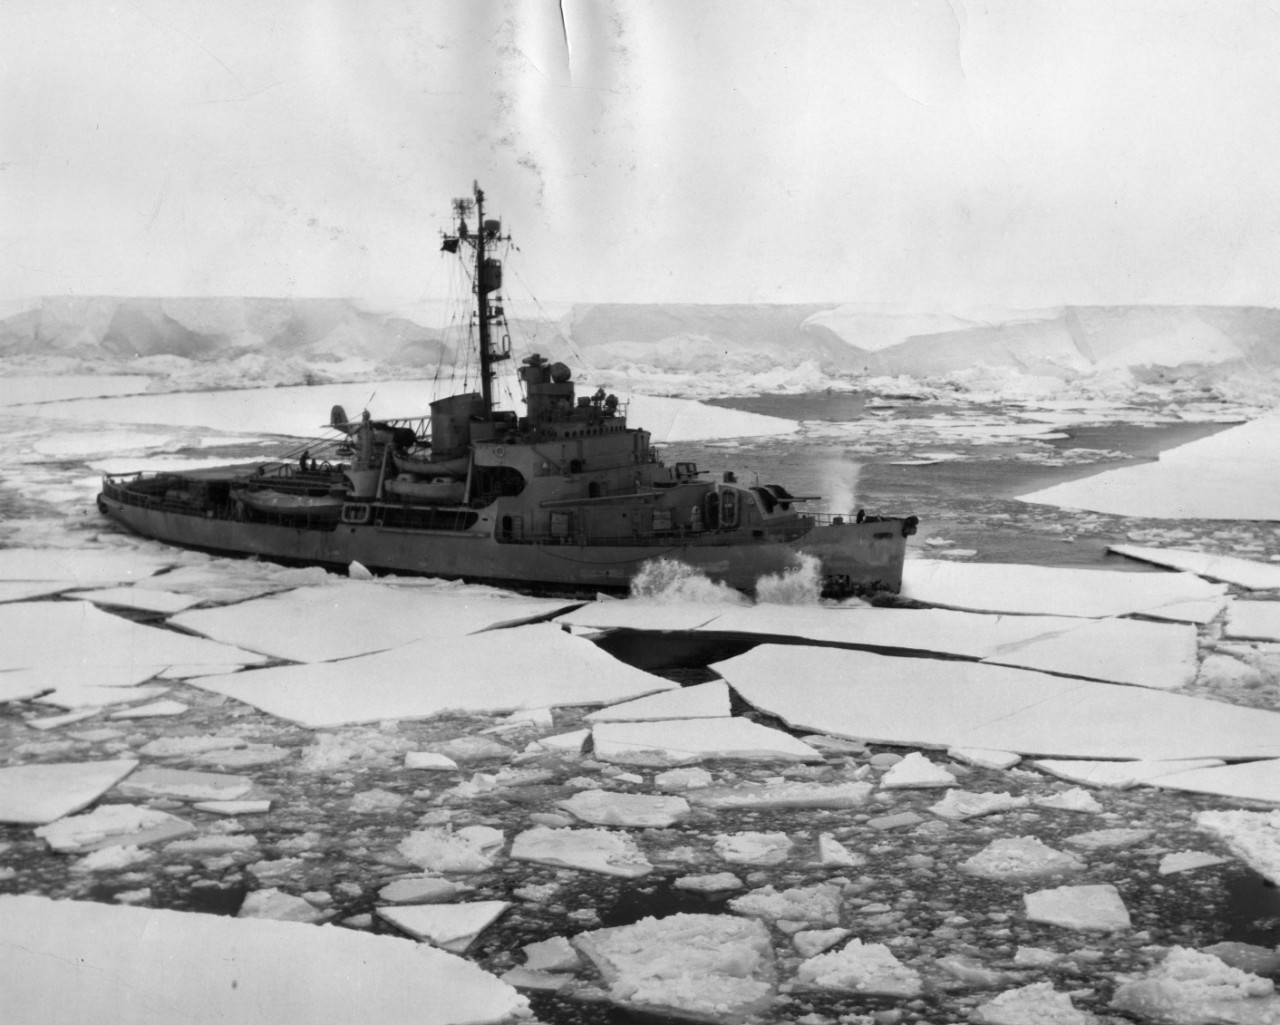 Icebreaker USS Northwind (AGB-5) cuts across the bow of USS Mount Olympus (AGC-8) to clear a path for her, through pack ice off Ross Sea, Antarctica